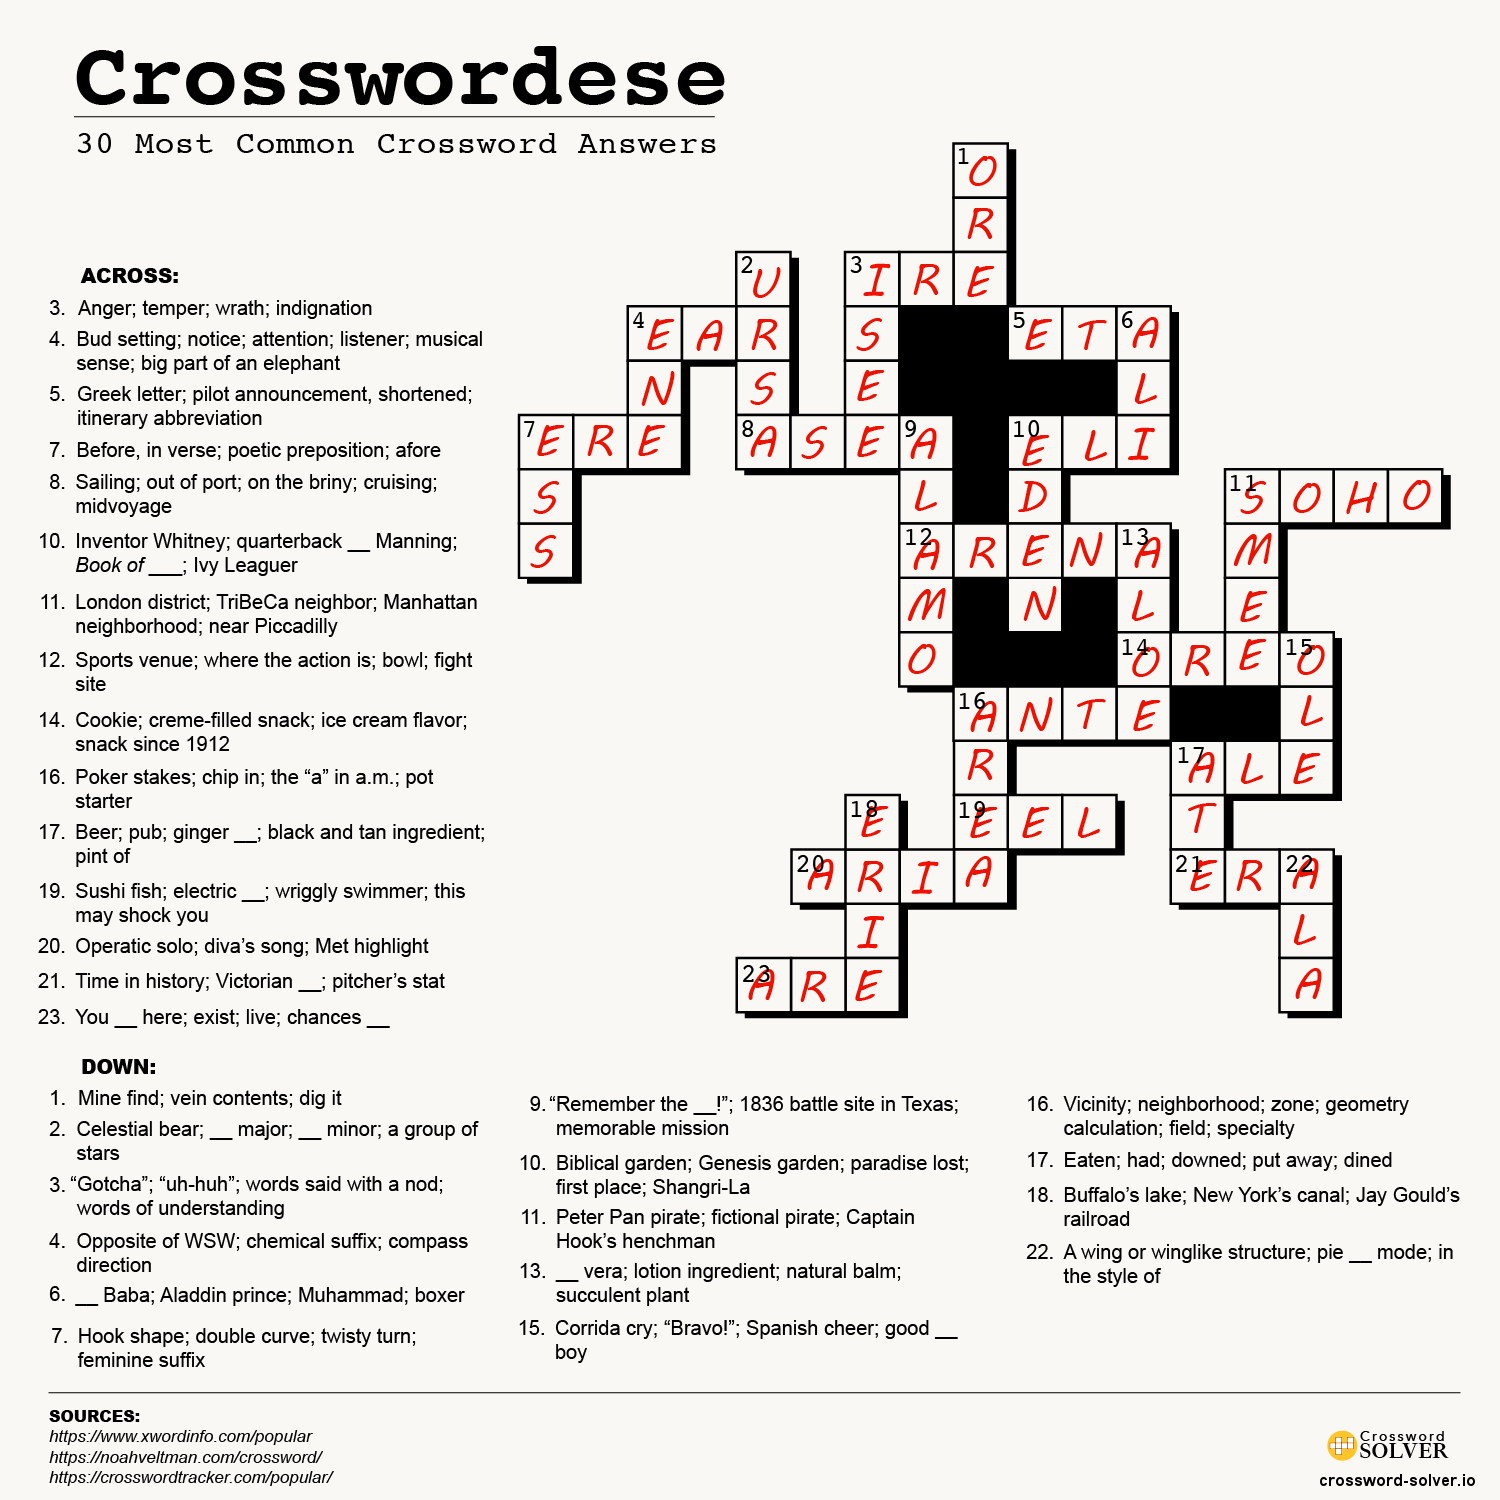 Daily Pop Crossword Answers Today [UPDATED] - Try Hard Guides